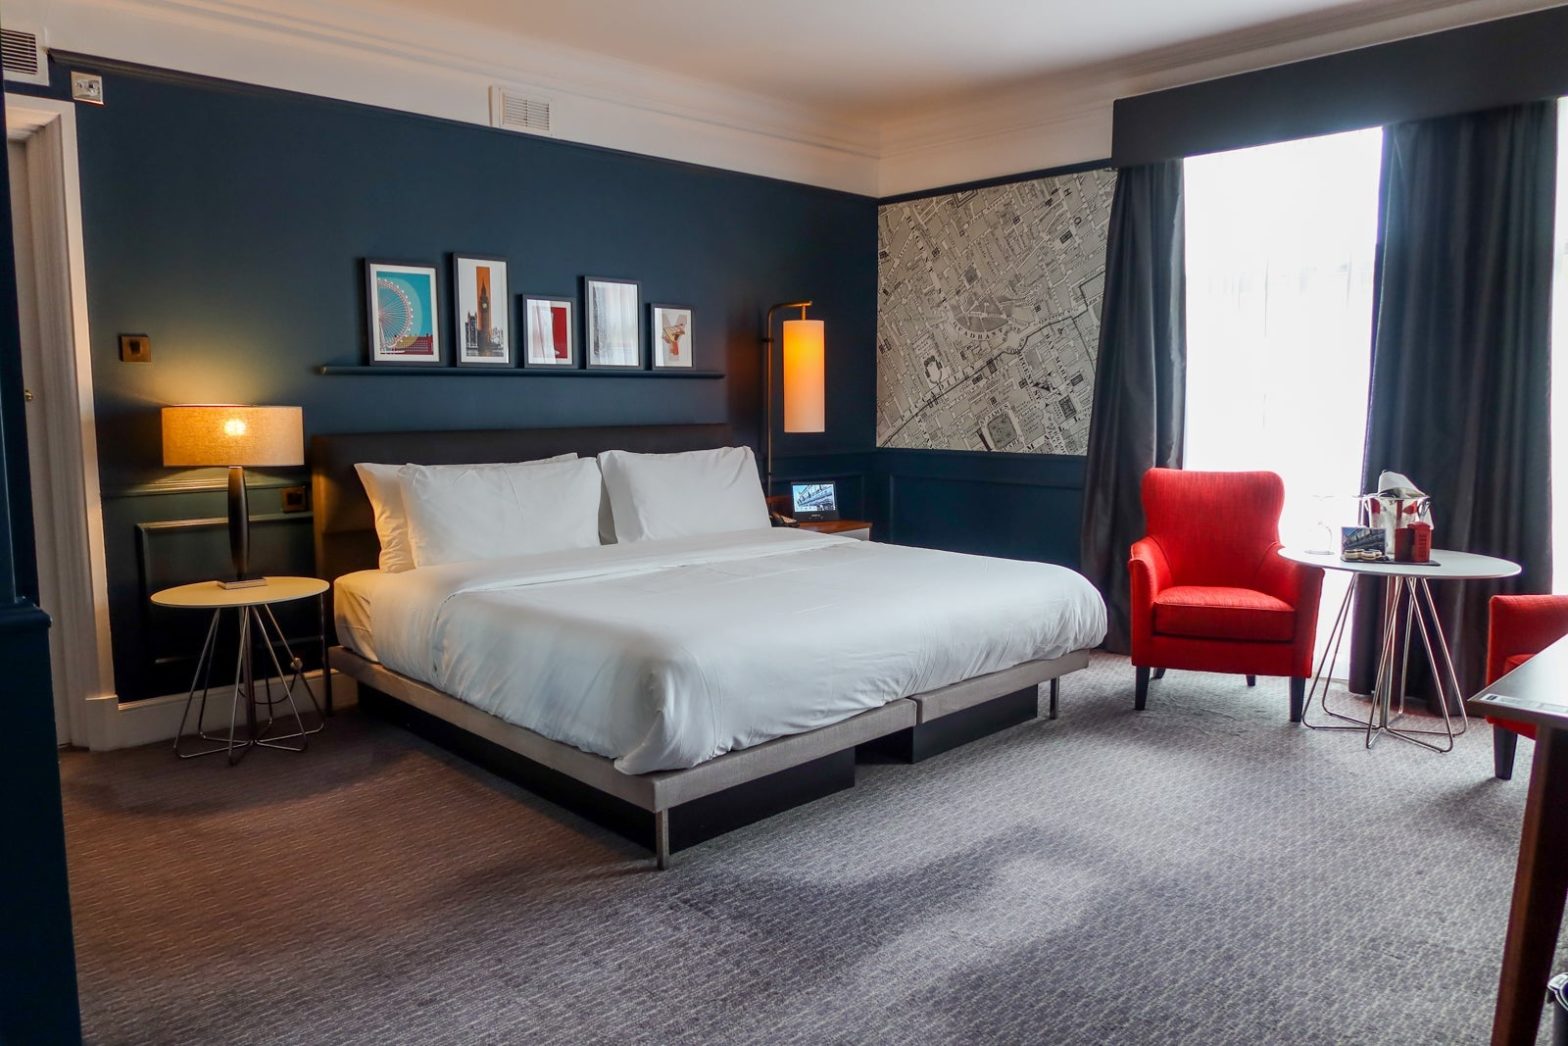 Sophisticated fun: Your first look at The Dilly, London’s newest five-star hotel